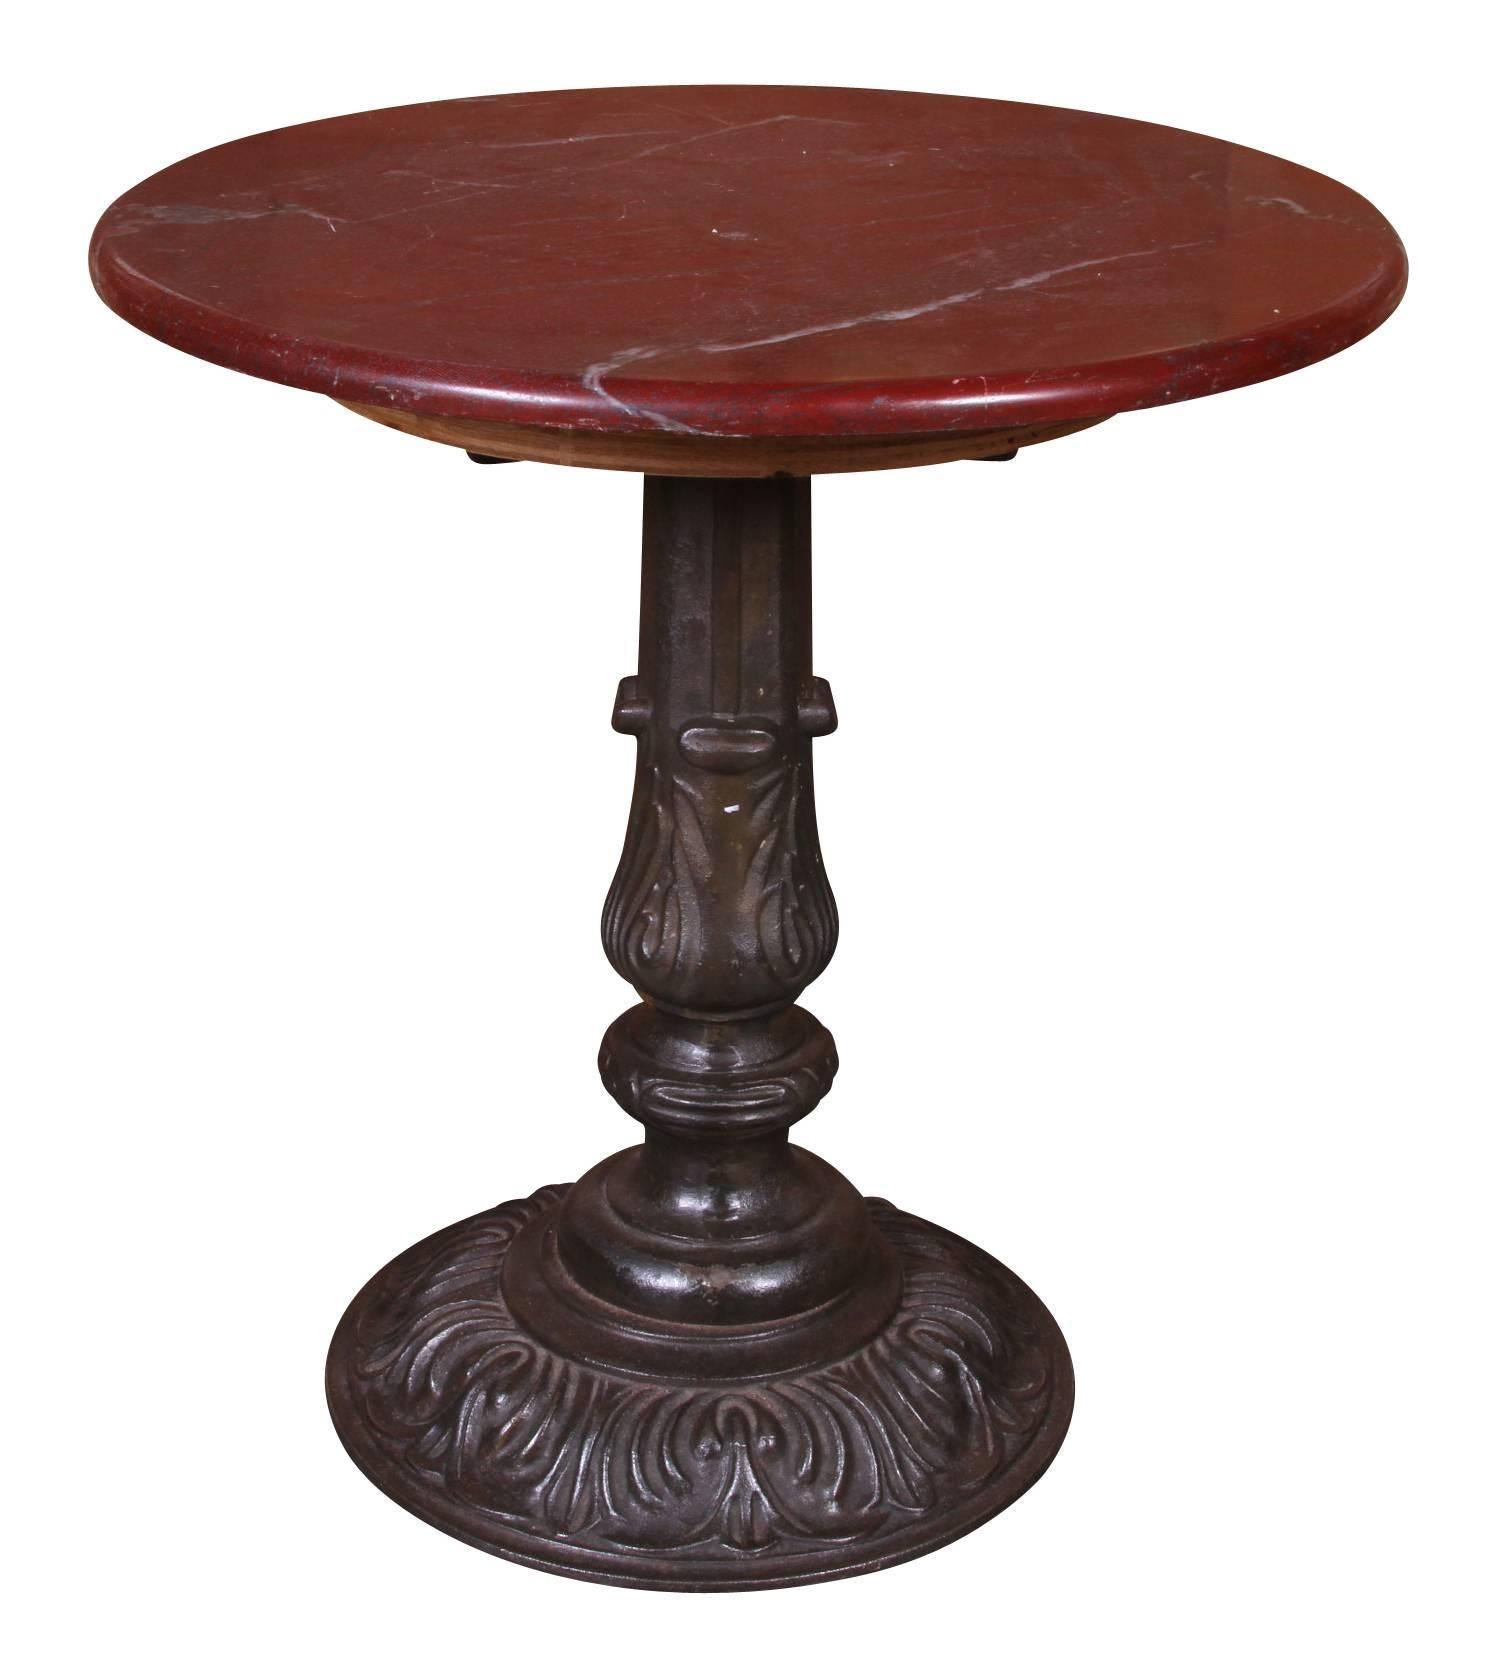 A pair of cafe tables with scrolled cast iron bases and Ox blood marble tops, once used at New York's Carlyle Hotel in the 1940s. The tables have great proportion and are very solidly made, with a beautiful overall age patina. There is some slight